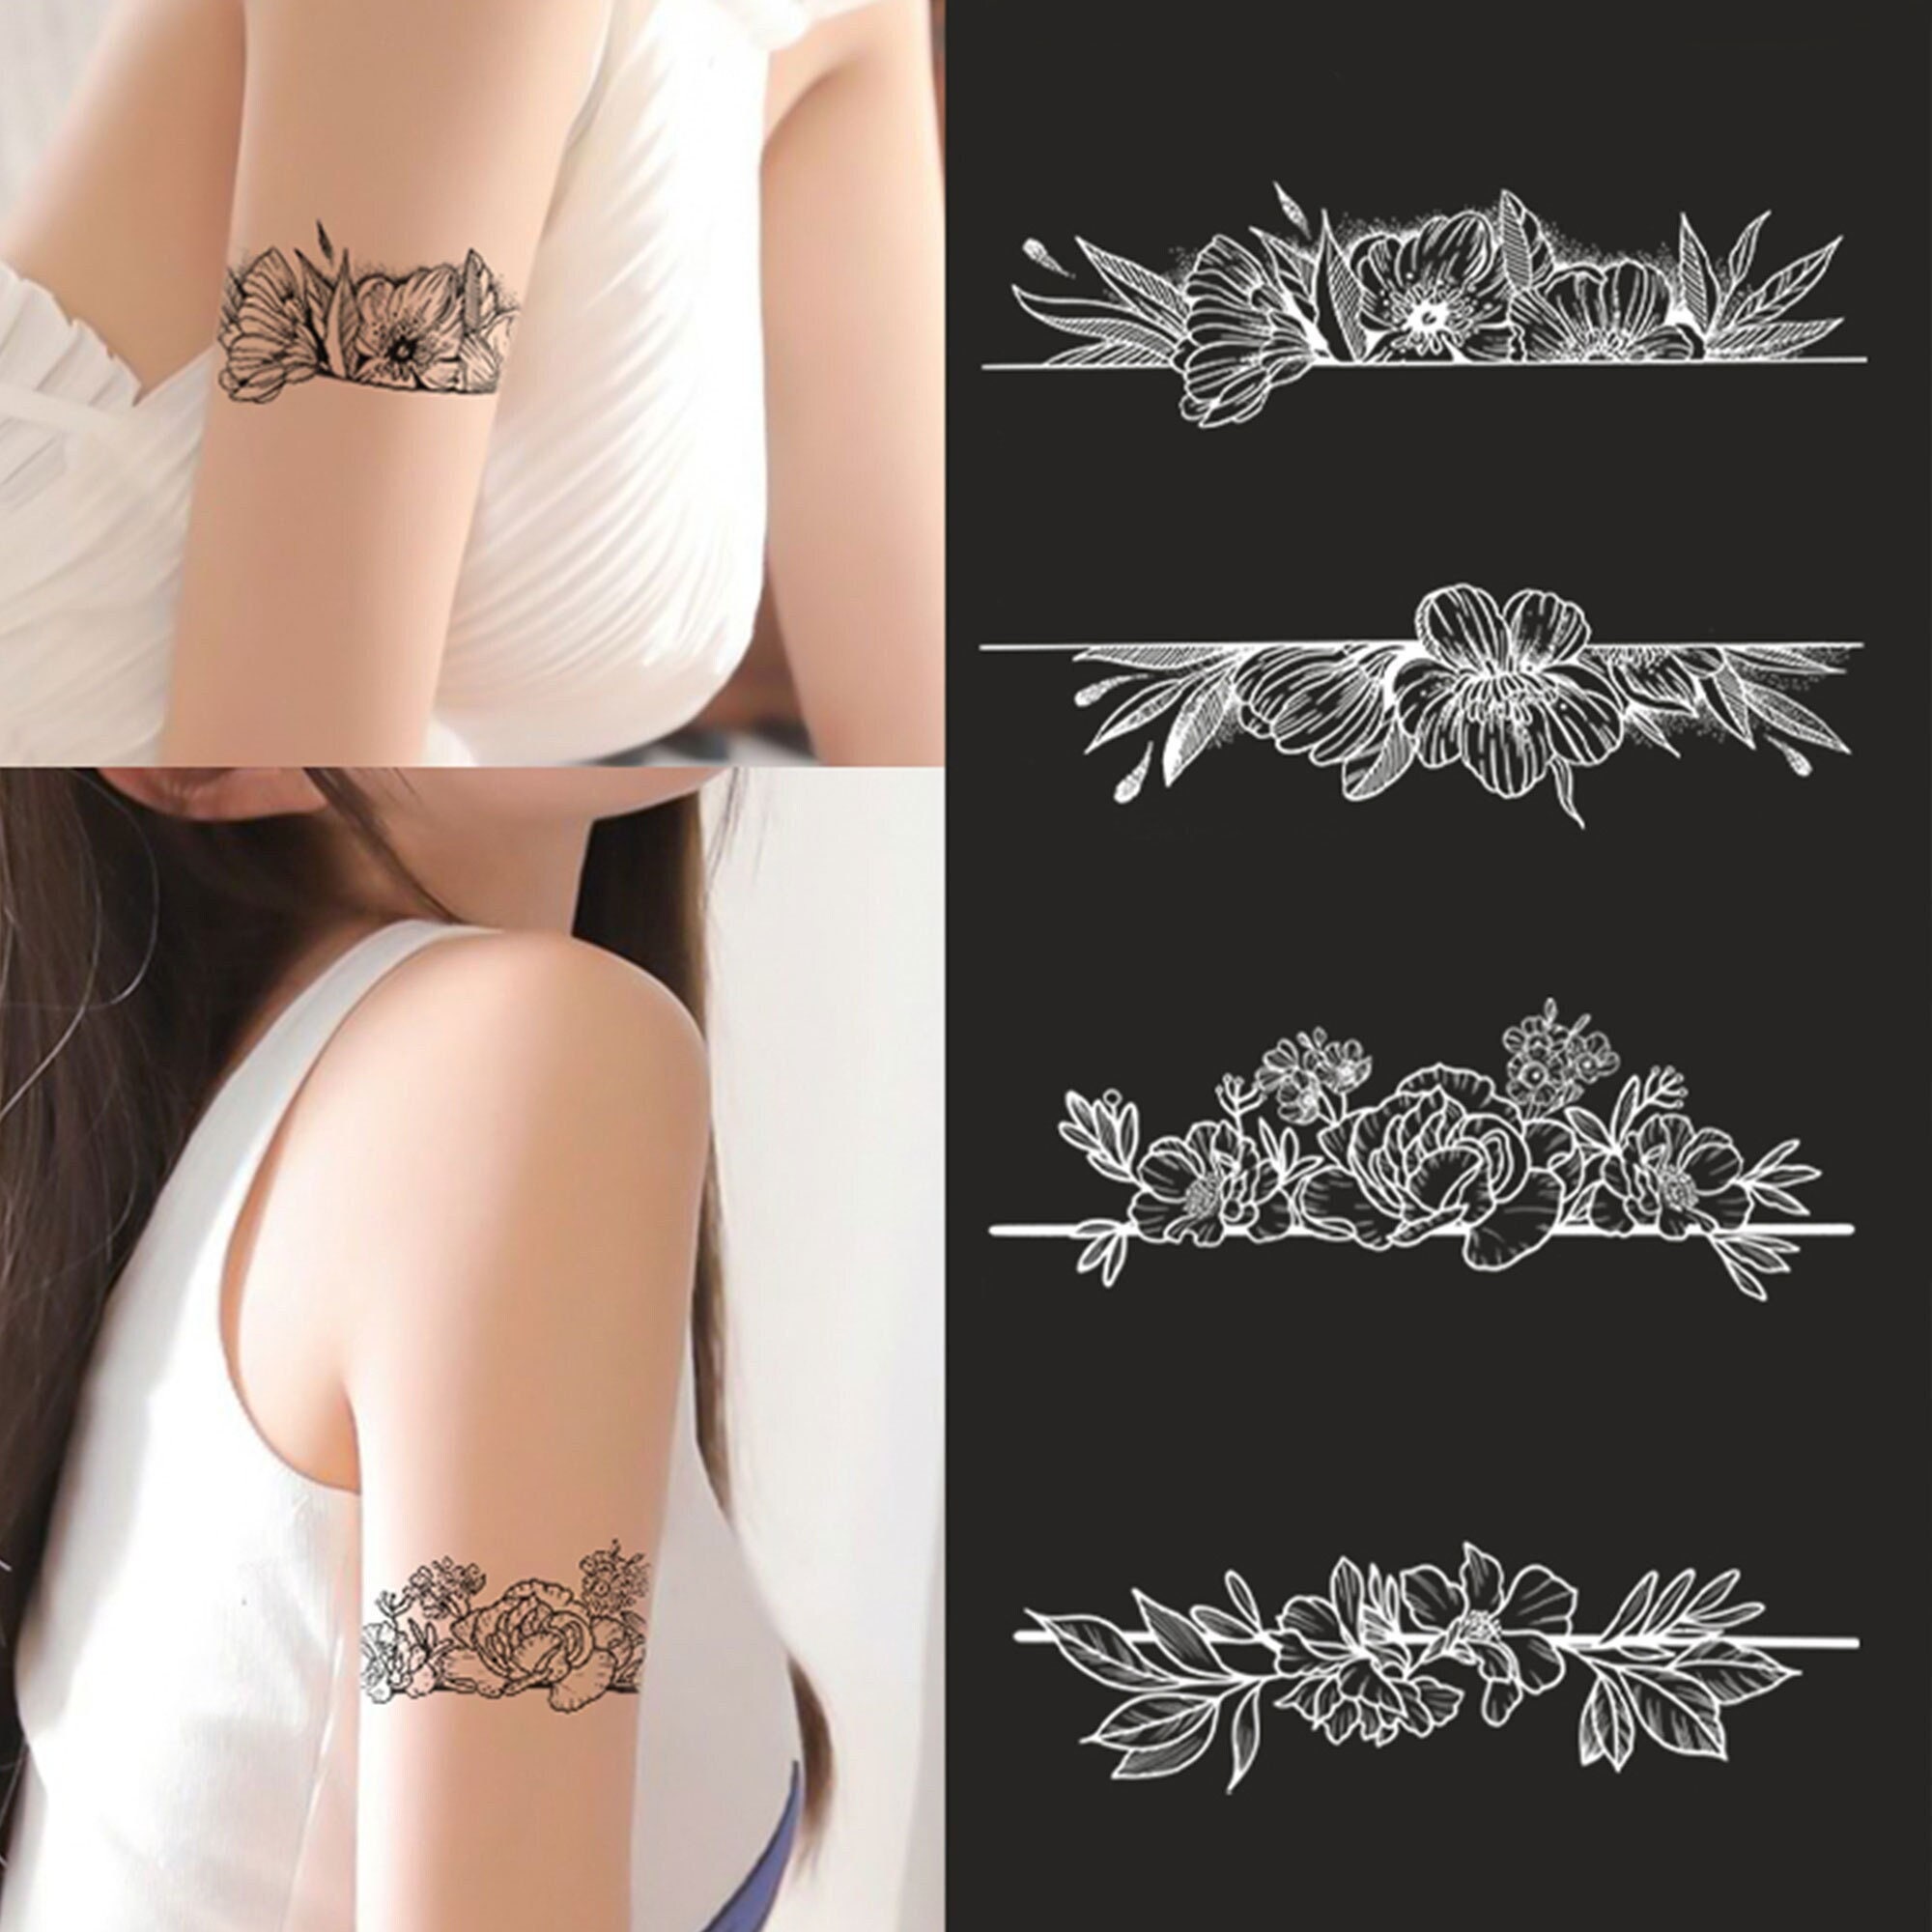 Flower Plant Leaves Temporary Tattoos Stickers - Half Sleeve Tattoos For  Arm, Large 3D Tattoos - The Perfect Gift For Men On Birthdays, Easter, And  Mo